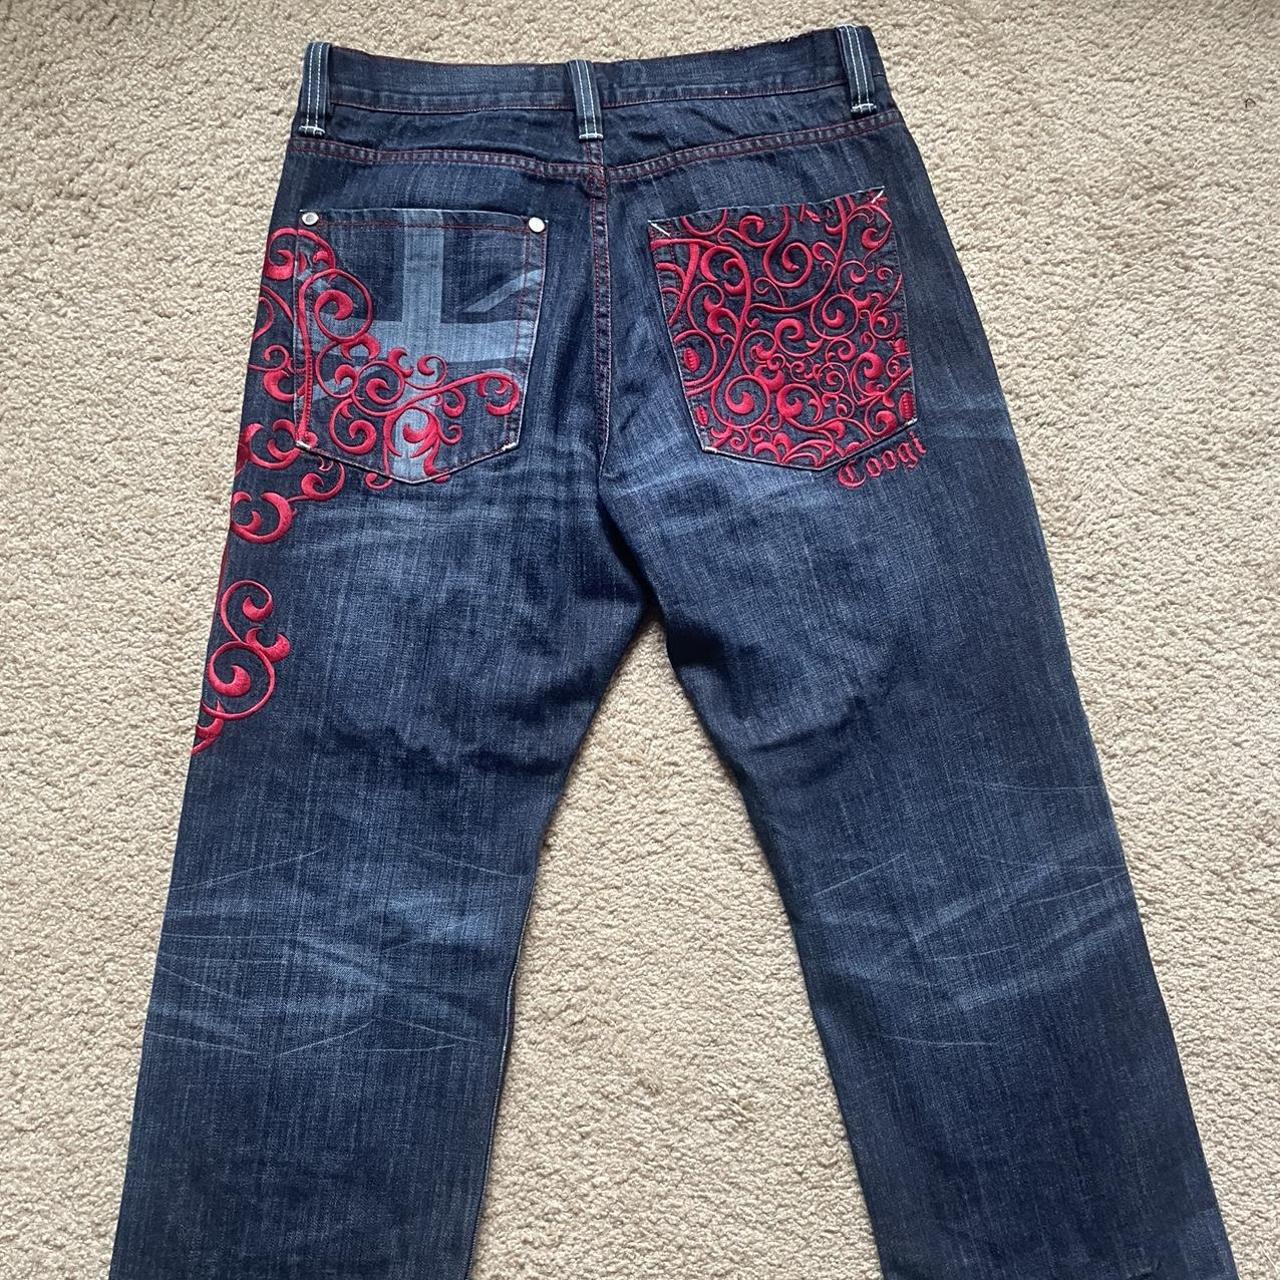 Coogi Men's Red and Navy Jeans